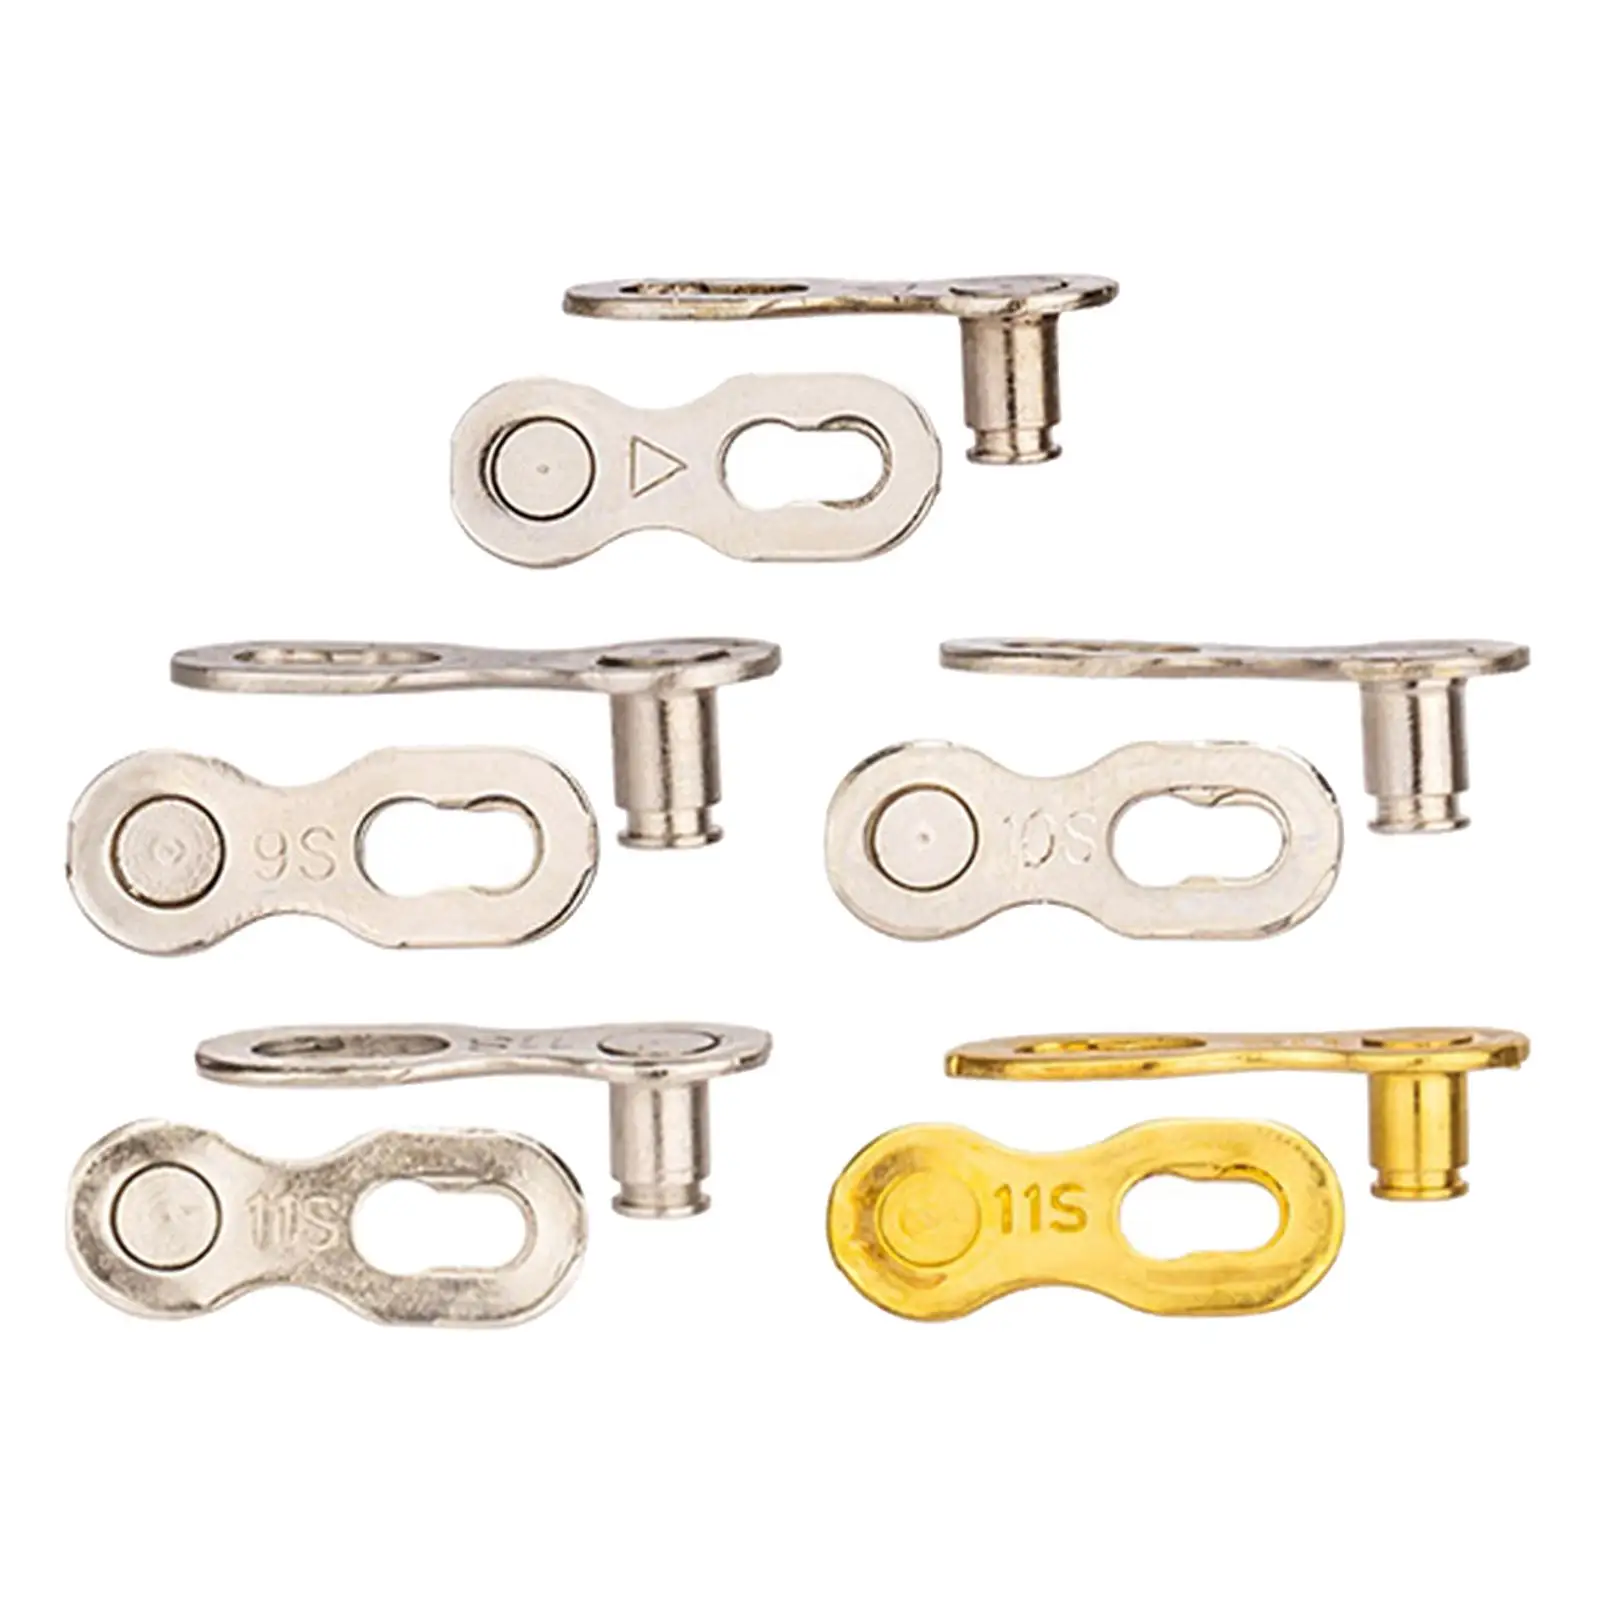  Pairs   Bike Connector  Chain Gear  for 6 7 8   Repair Replacement